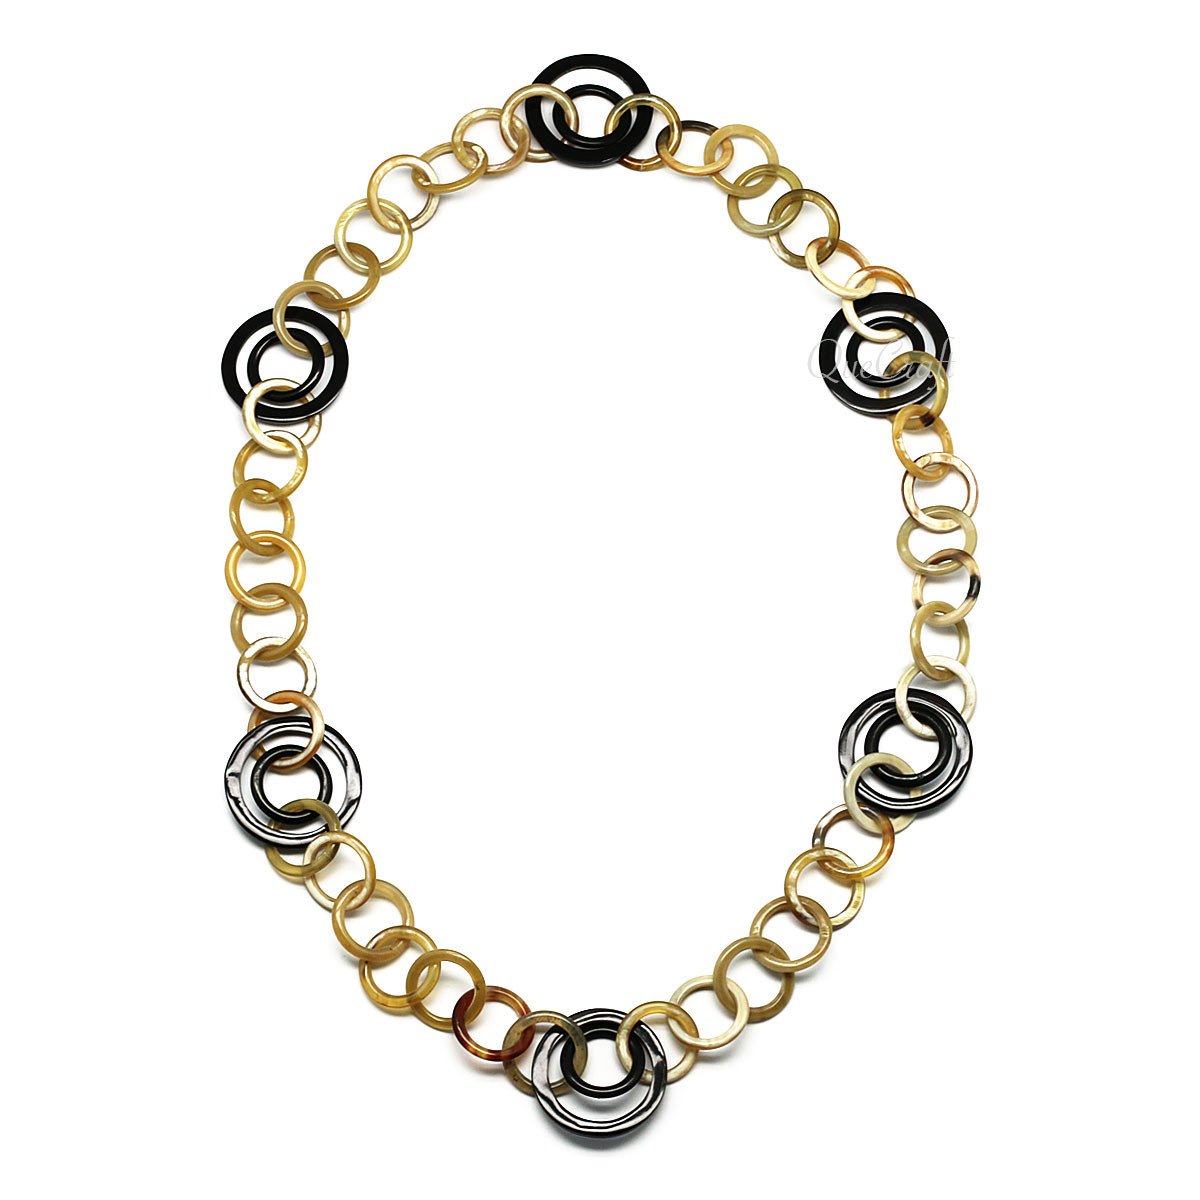 Horn Chain Necklace #4193 - HORN JEWELRY